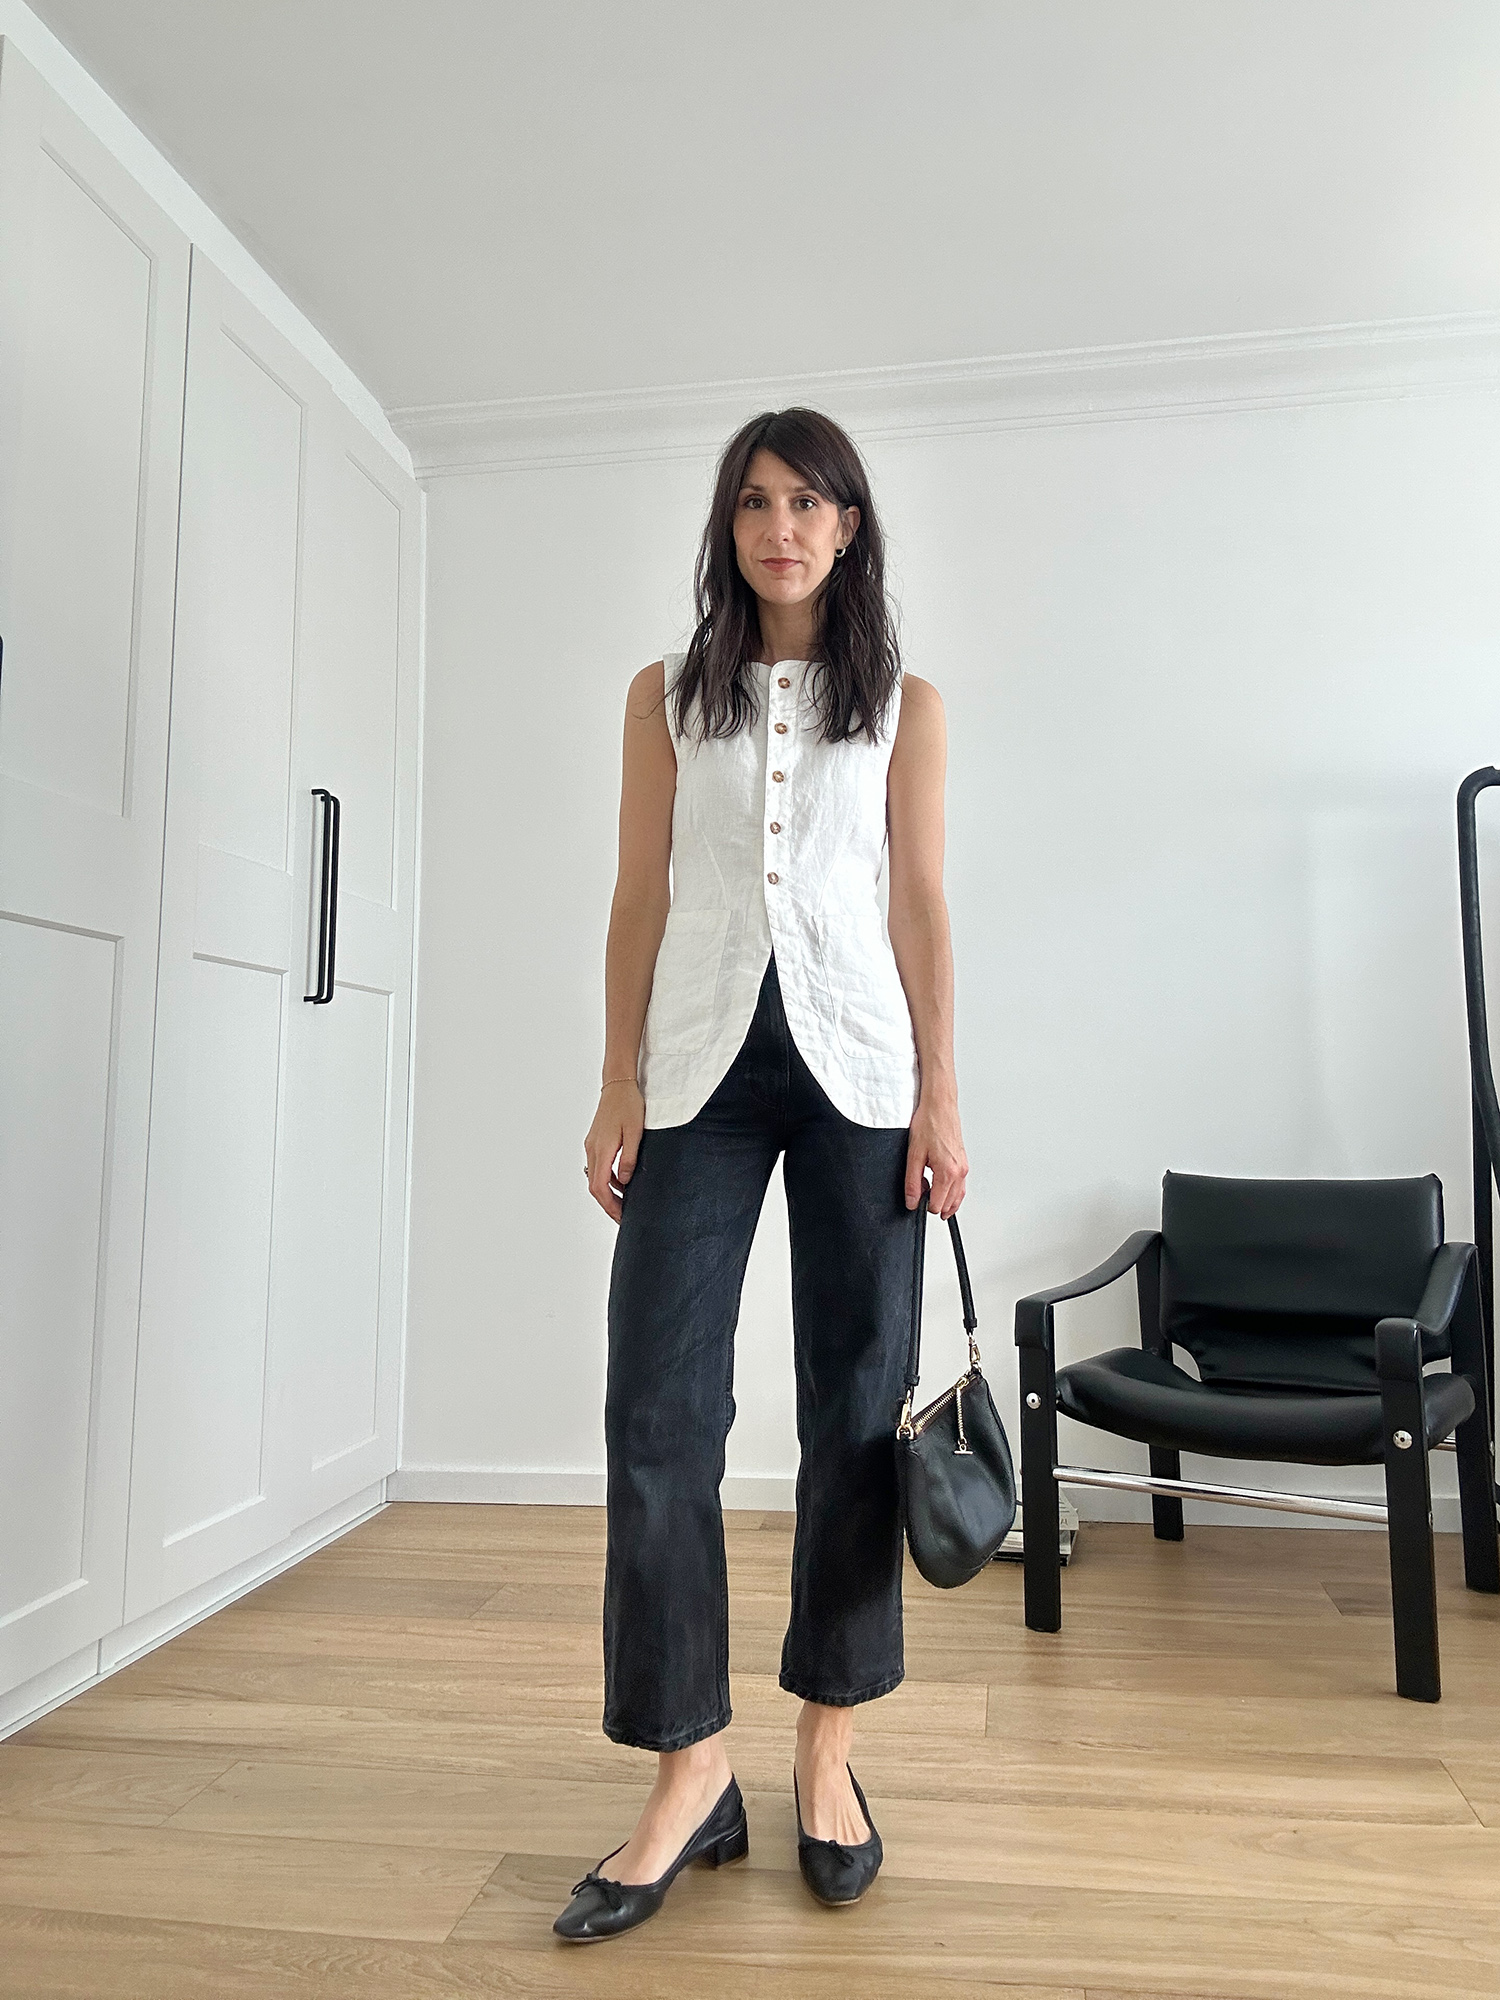 Posse Emma Vest Review and How to style